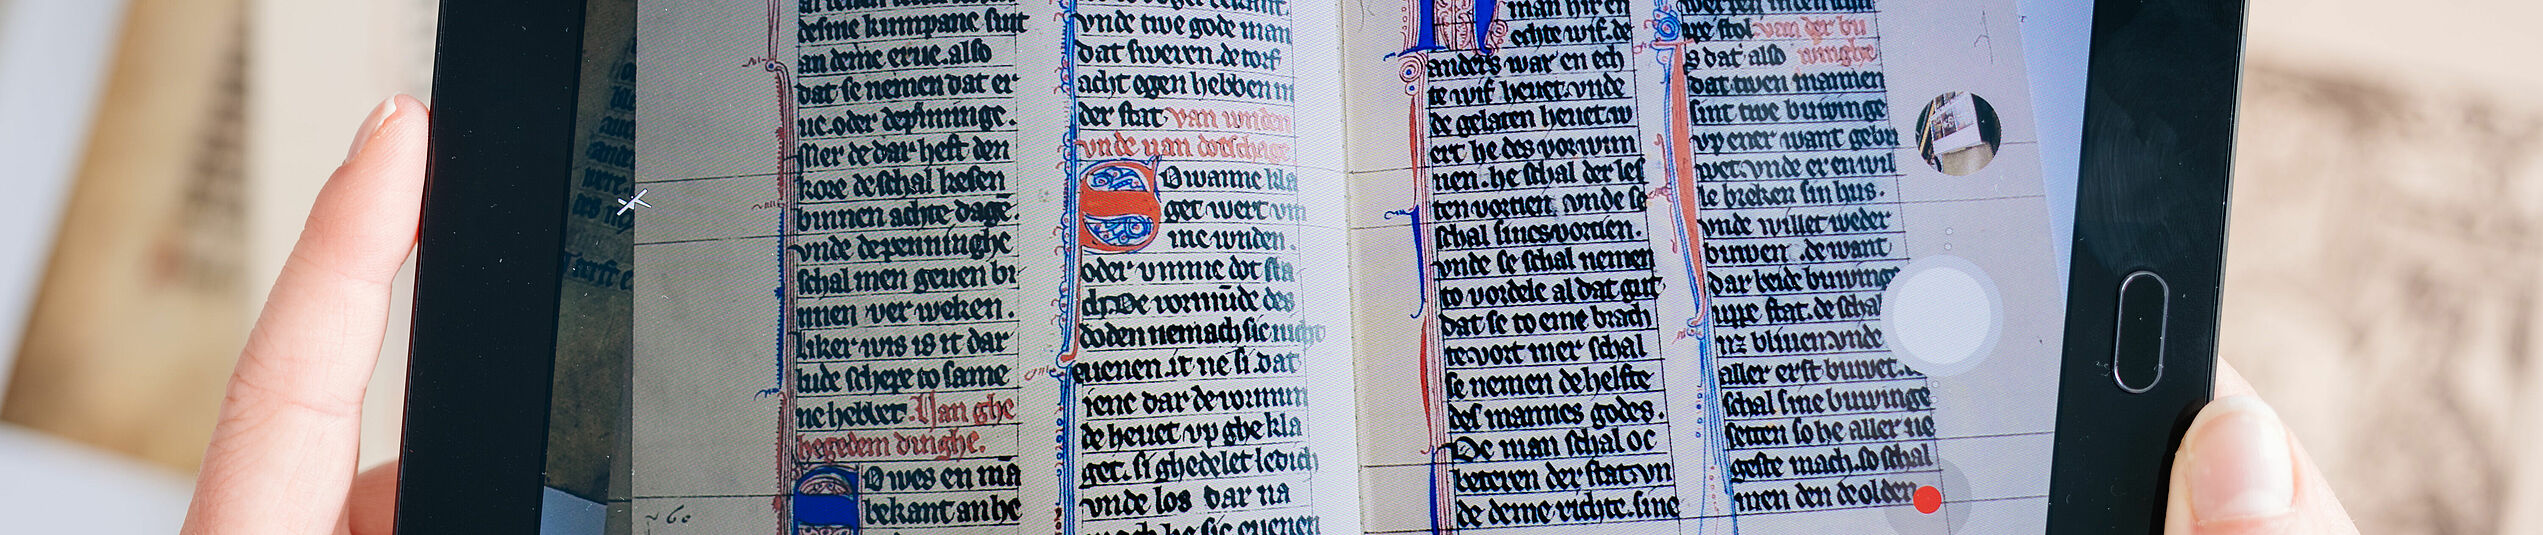 A book with medieval script is displayed on a tablet held in both hands